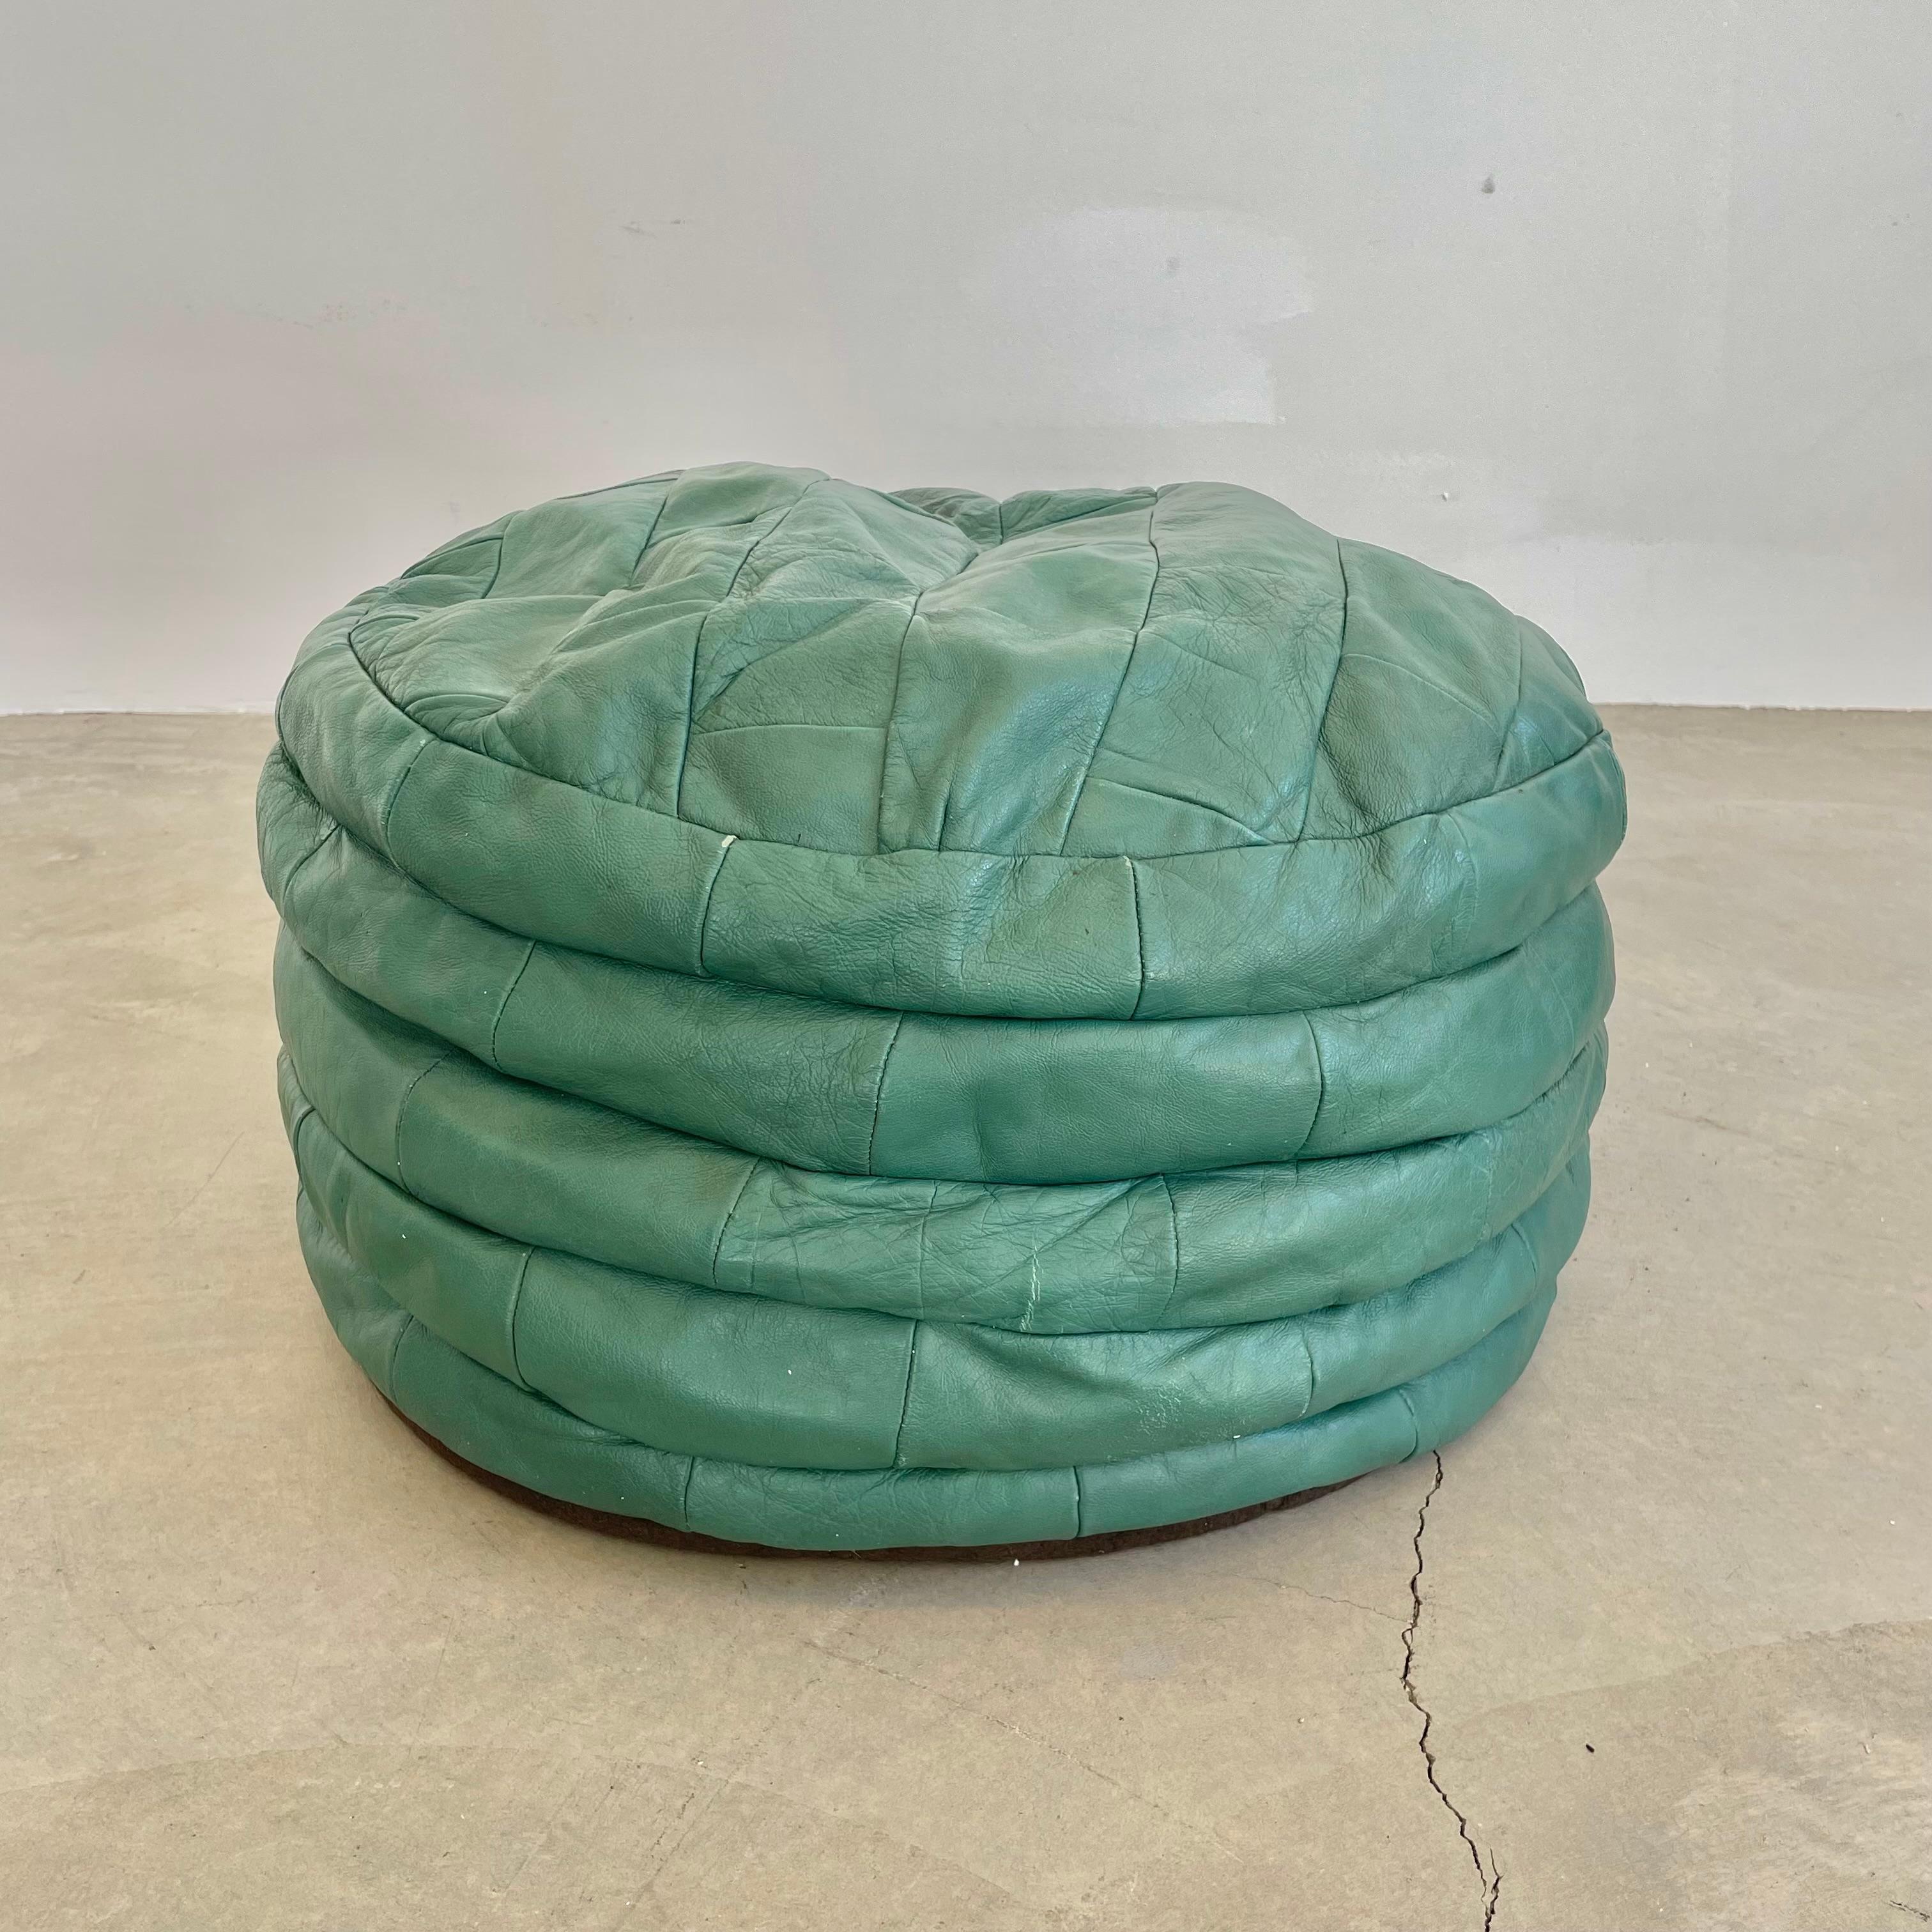 Stunning mint green leather pouf/ottoman by Swiss designer De Sede with square patchwork. Handmade with wonderful light patina. Gorgeous accent piece. Good vintage condition with soft supple leather. Brand new filler. Unusual color. Perfect living